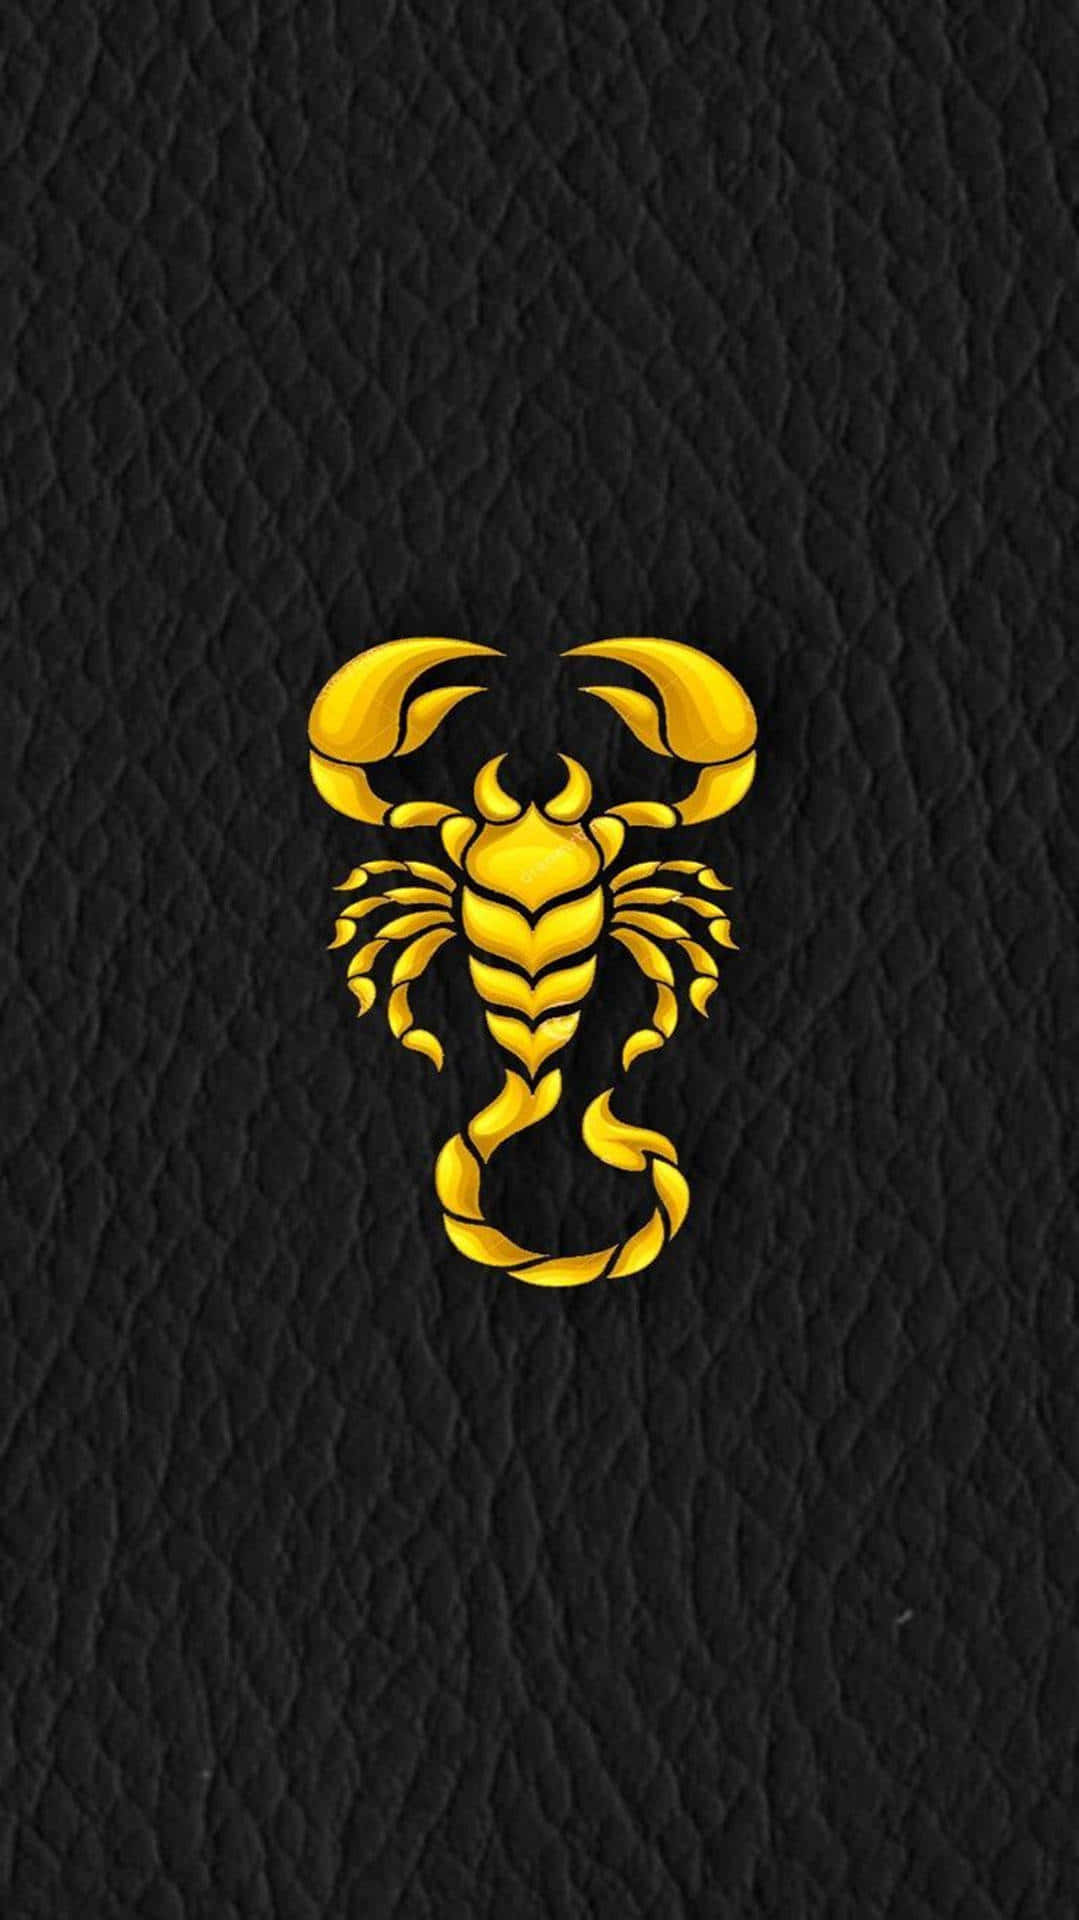 Black And Gold Aesthetic Scorpion Wallpaper